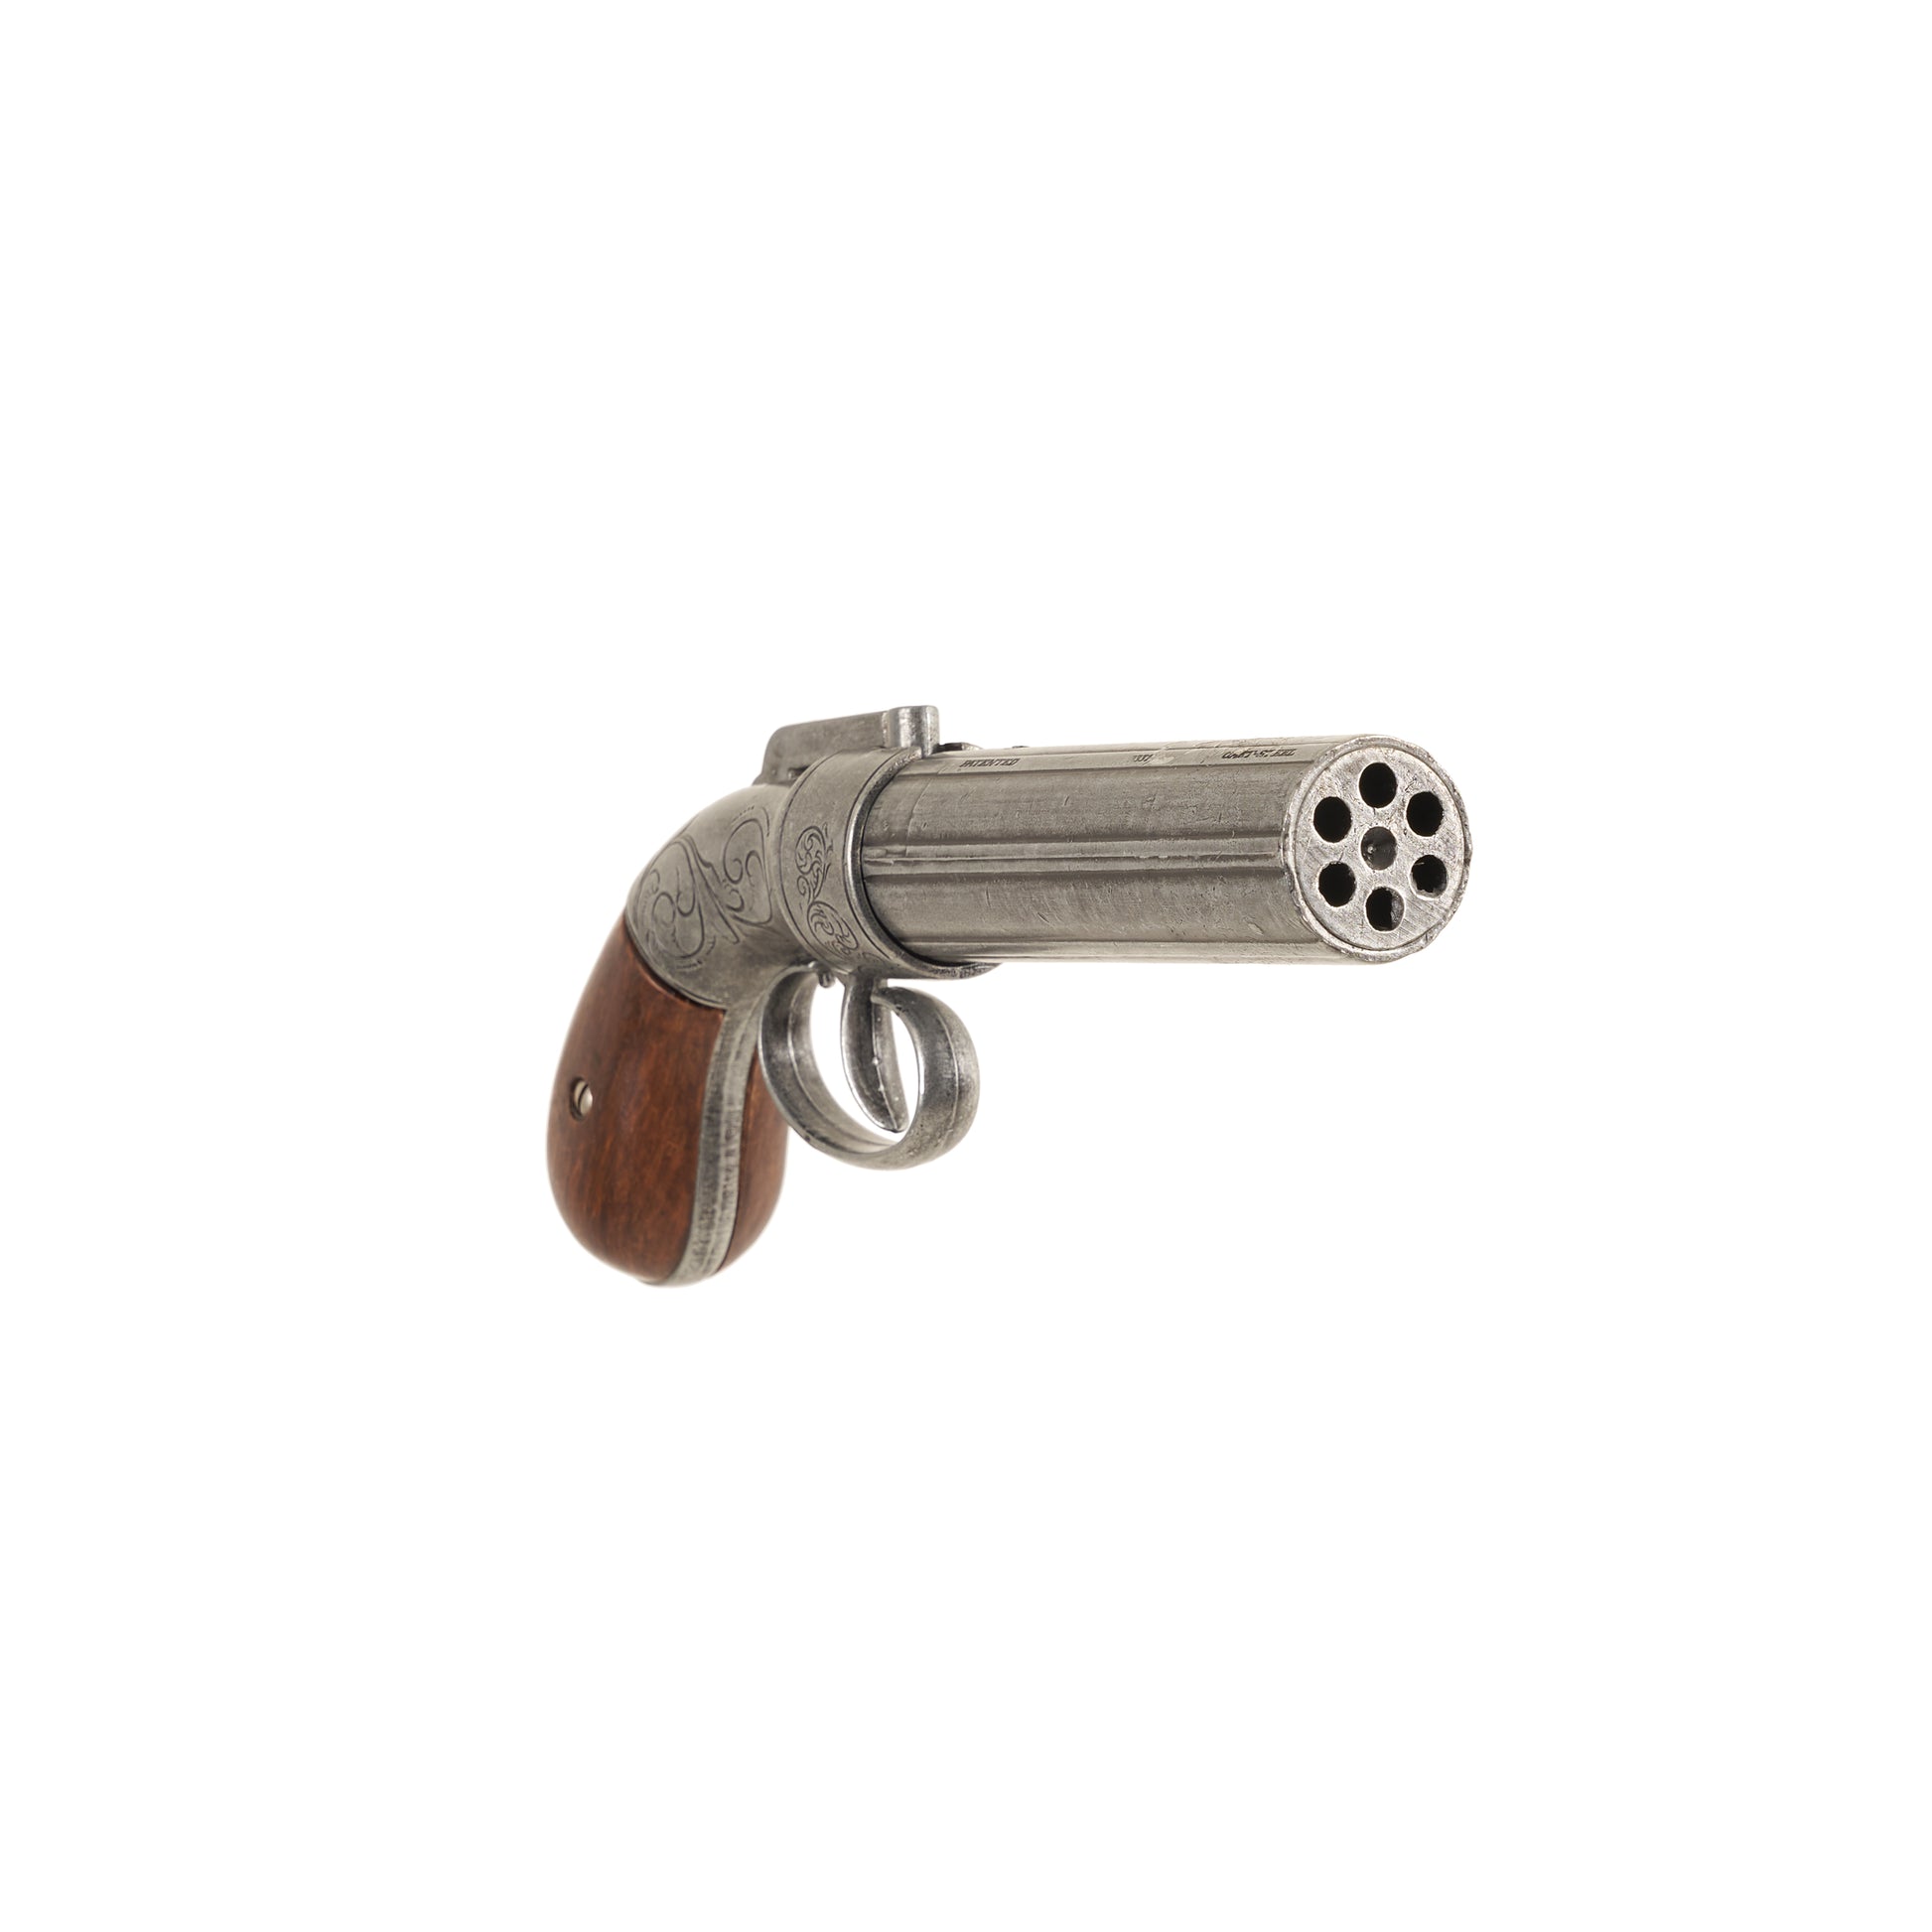 Front view of Non-Firing Replica 1837 Pepperbox Revolver with scrollwork adorning the metal, wooden grip, and a good view of the six shot rotating barrel. 